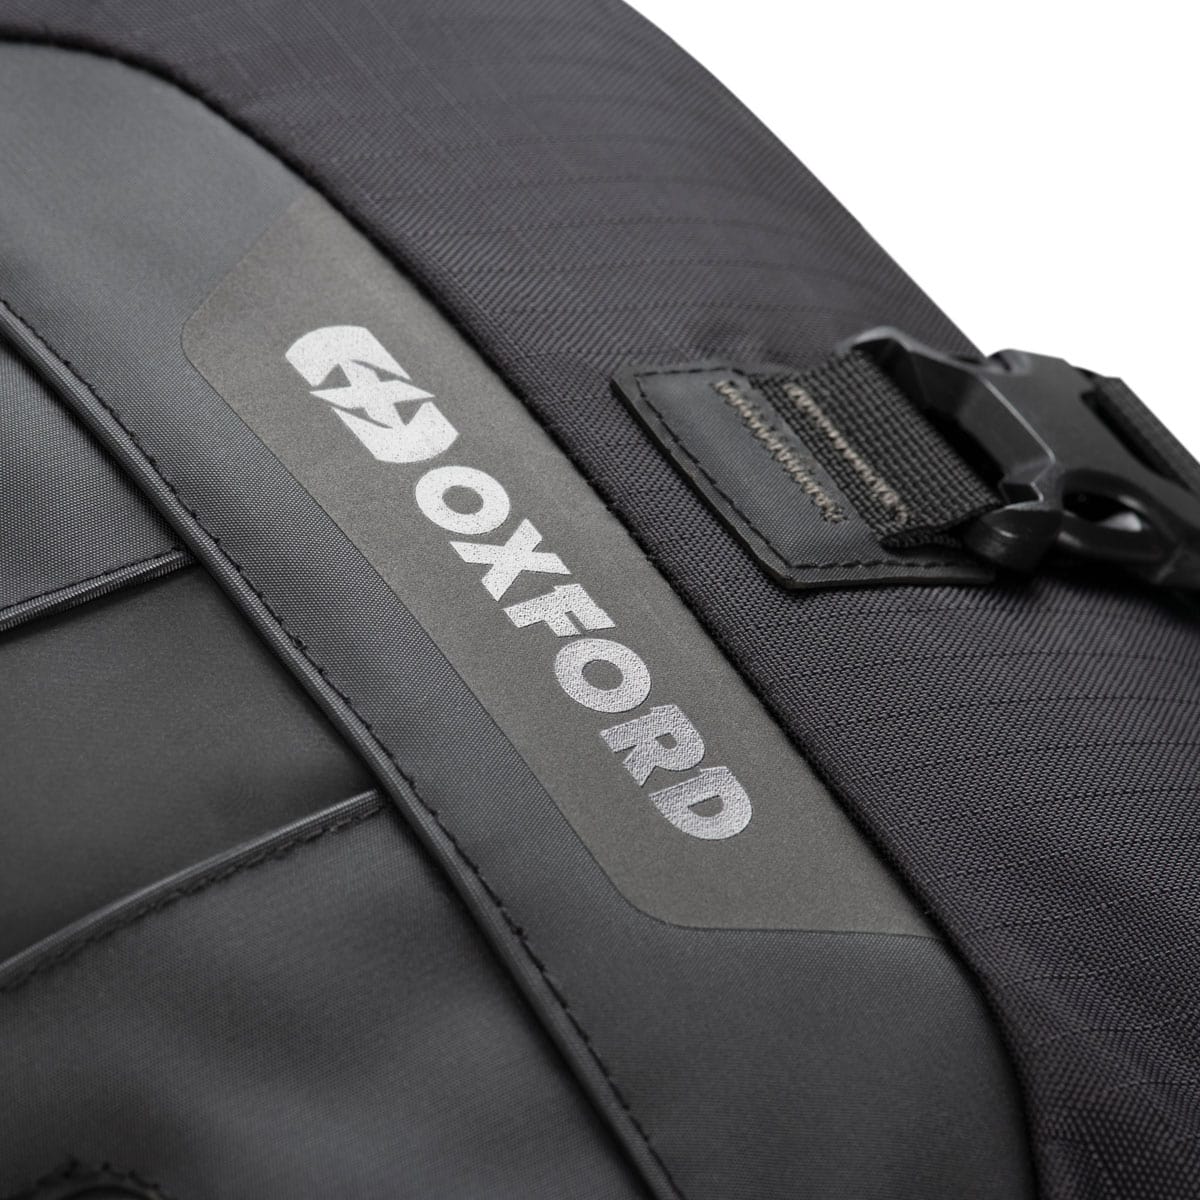 Oxford Atlas B-20 Advanced Backpack - Designed for versatility and durability, this 20 Litre backpack is part of a modular luggage system